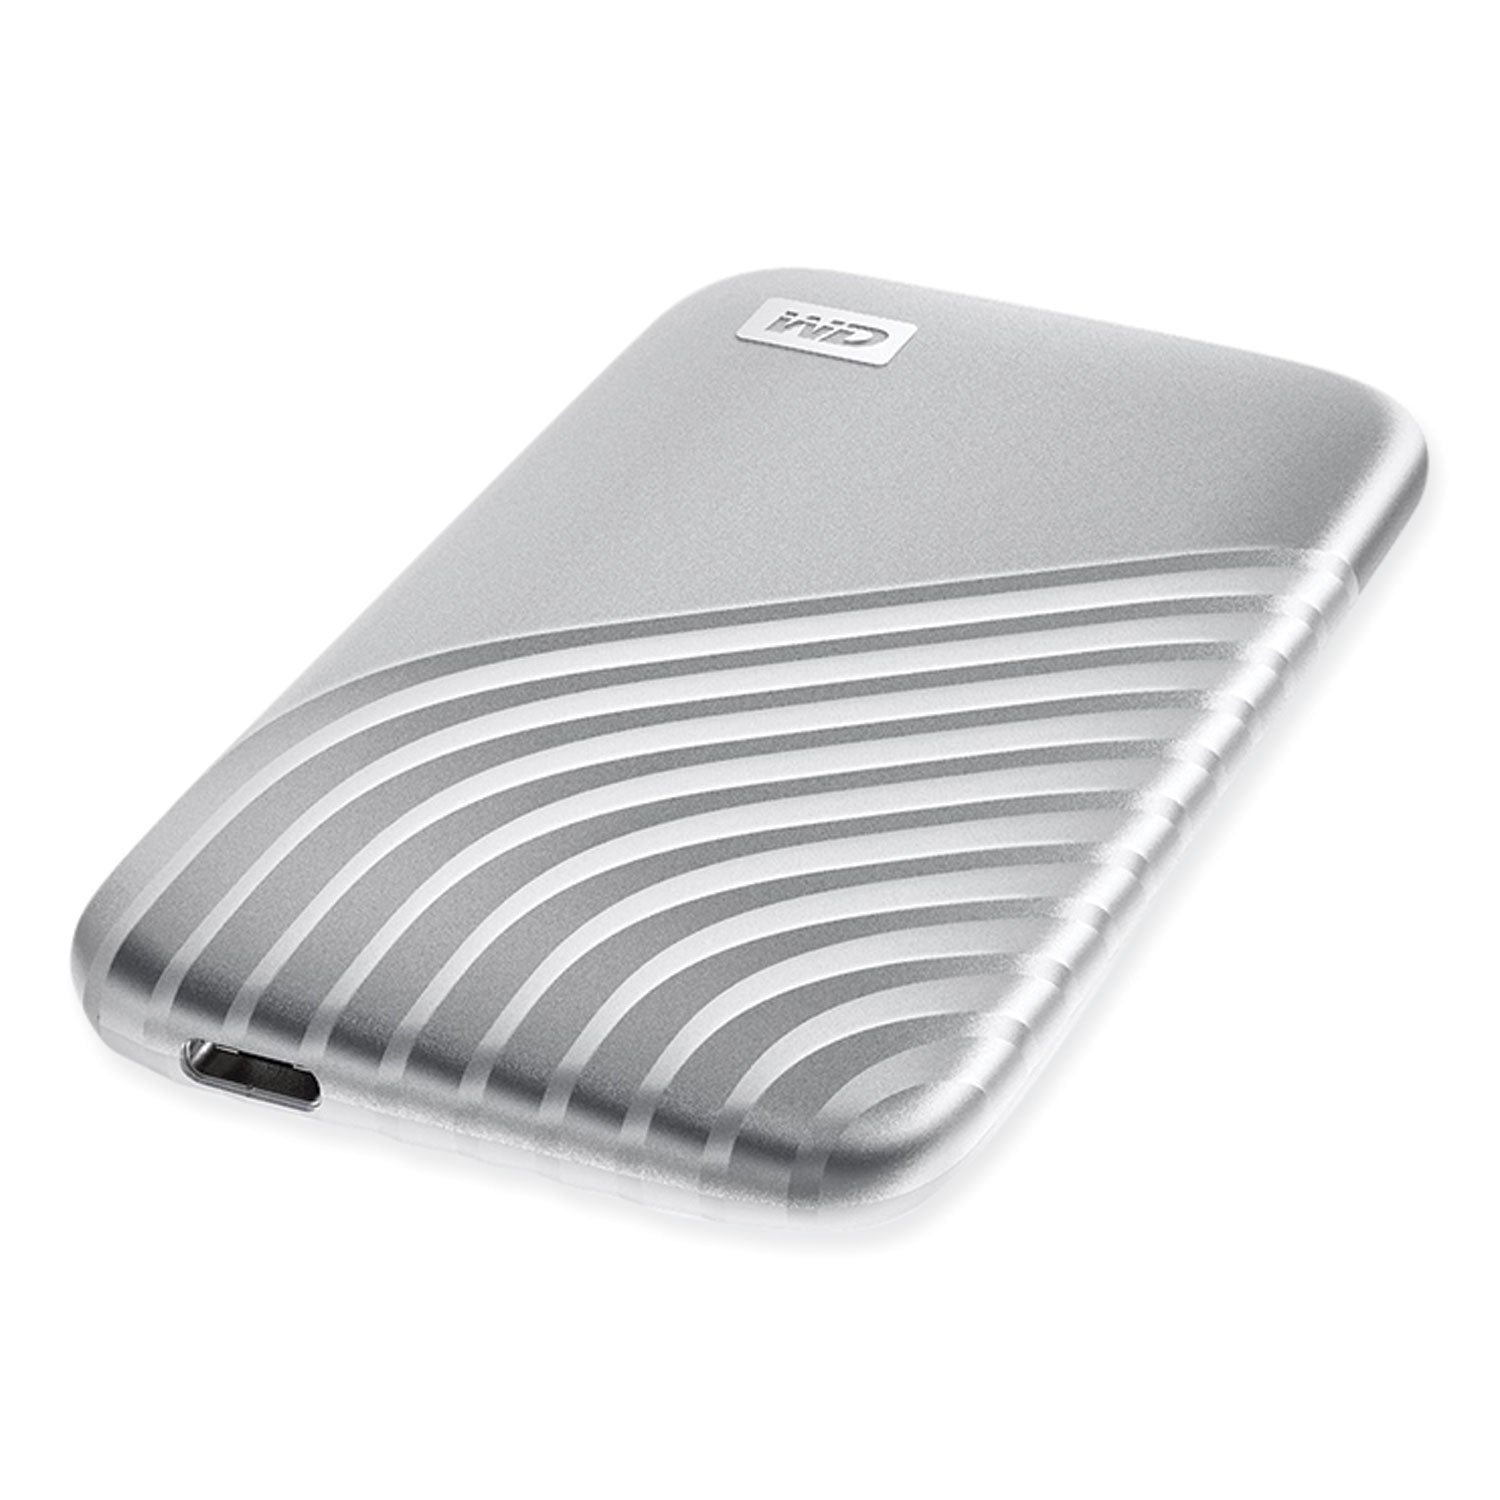 my-passport-external-solid-state-drive-1-tb-usb-32-silver_wdcagf0010bsl - 6